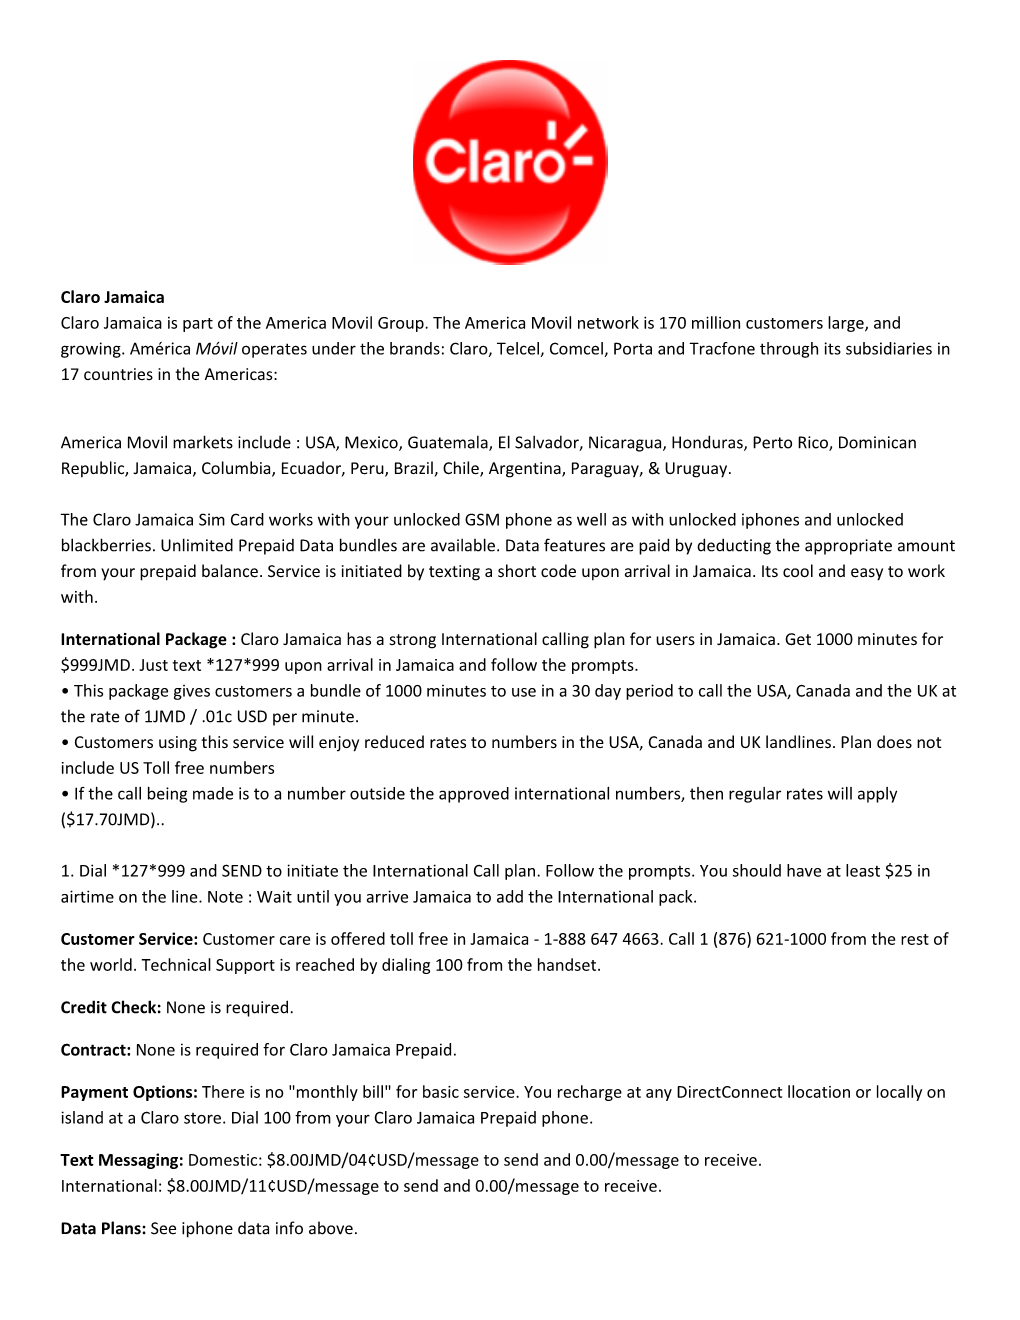 Claro Jamaica Claro Jamaica Is Part of the America Movil Group. the America Movil Network Is 170 Million Customers Large, and Growing